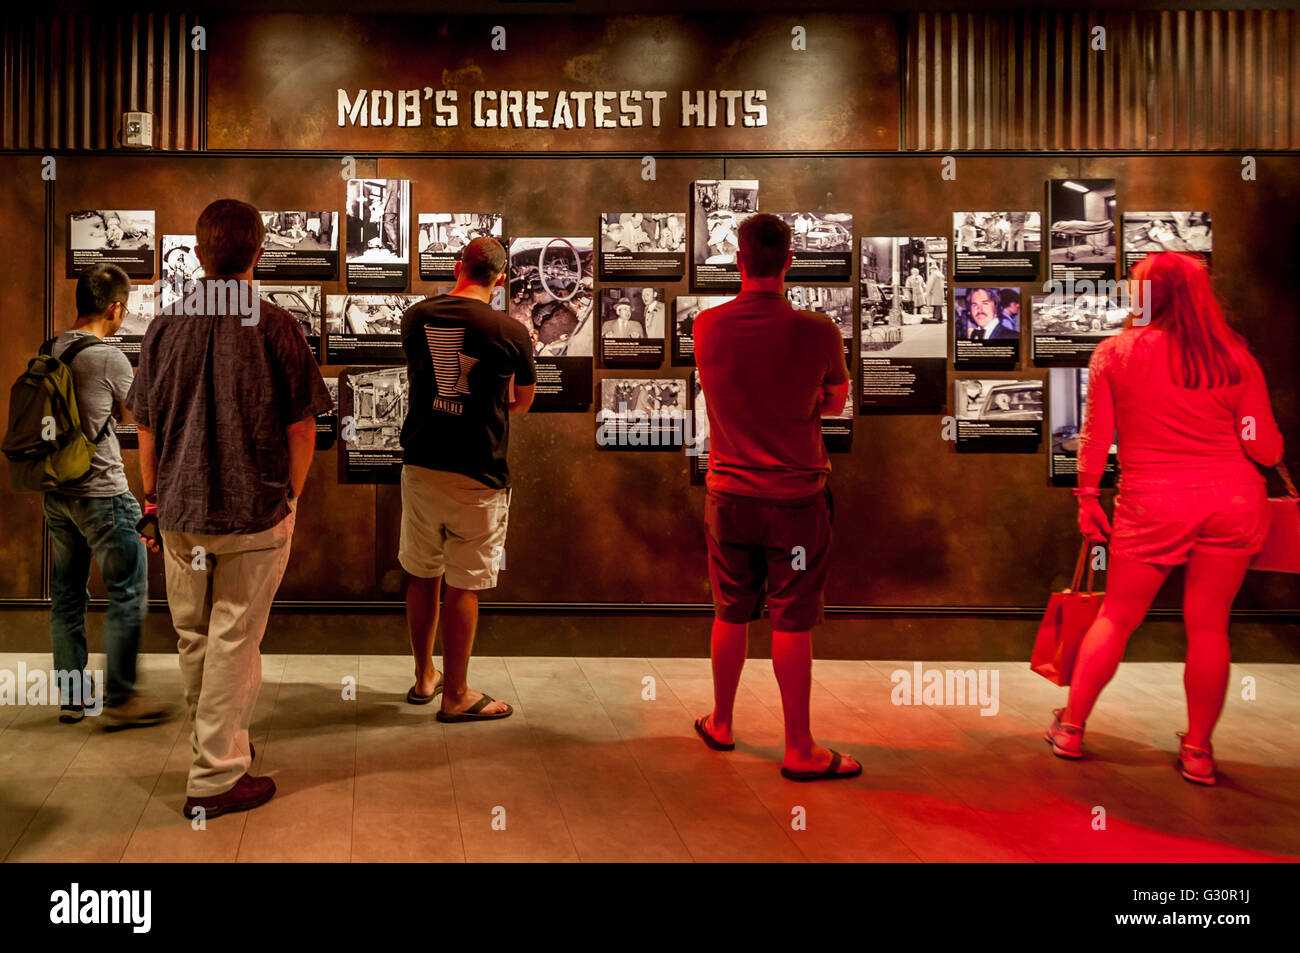 Visitors to the Las Vegas Mob Museum take in the Mob's Greatest Hits wall with horrific historic crime scene photos and reports. Stock Photo